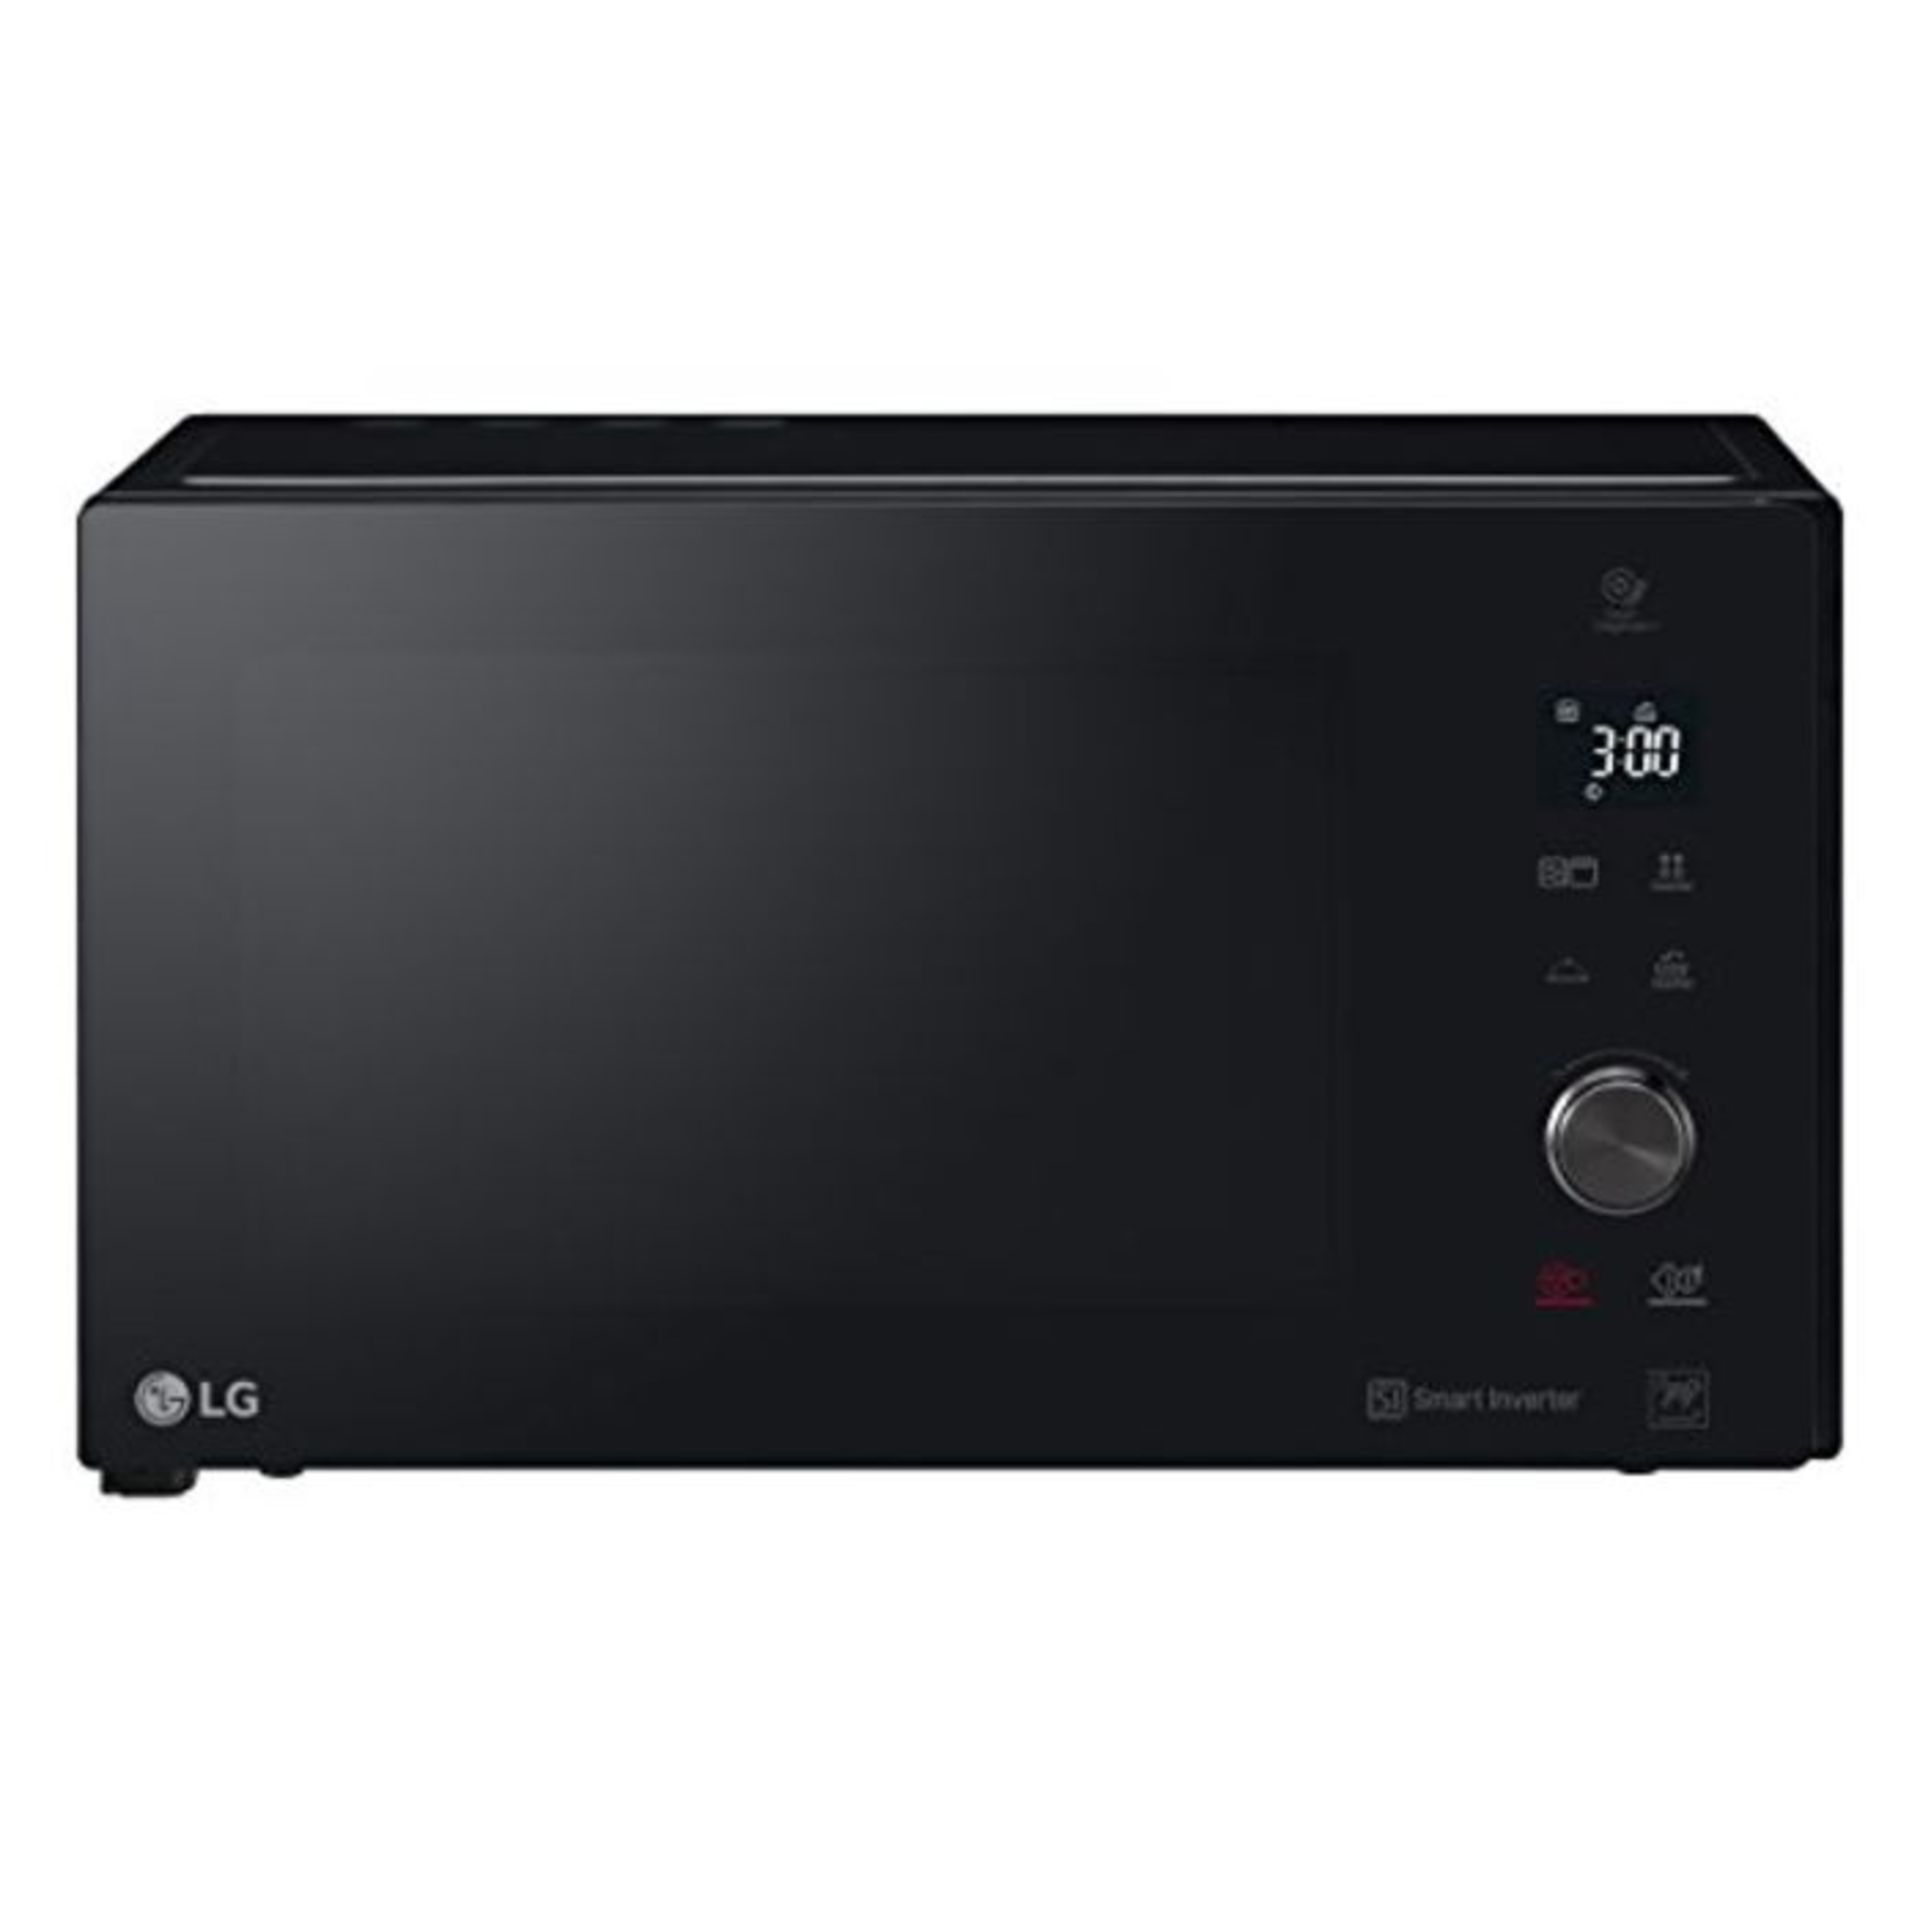 RRP £163.00 LG MH7265DPS Grill Smart Inverter - Microwave Grill 2 in 1, 1200 W, 32 L, LED Display,